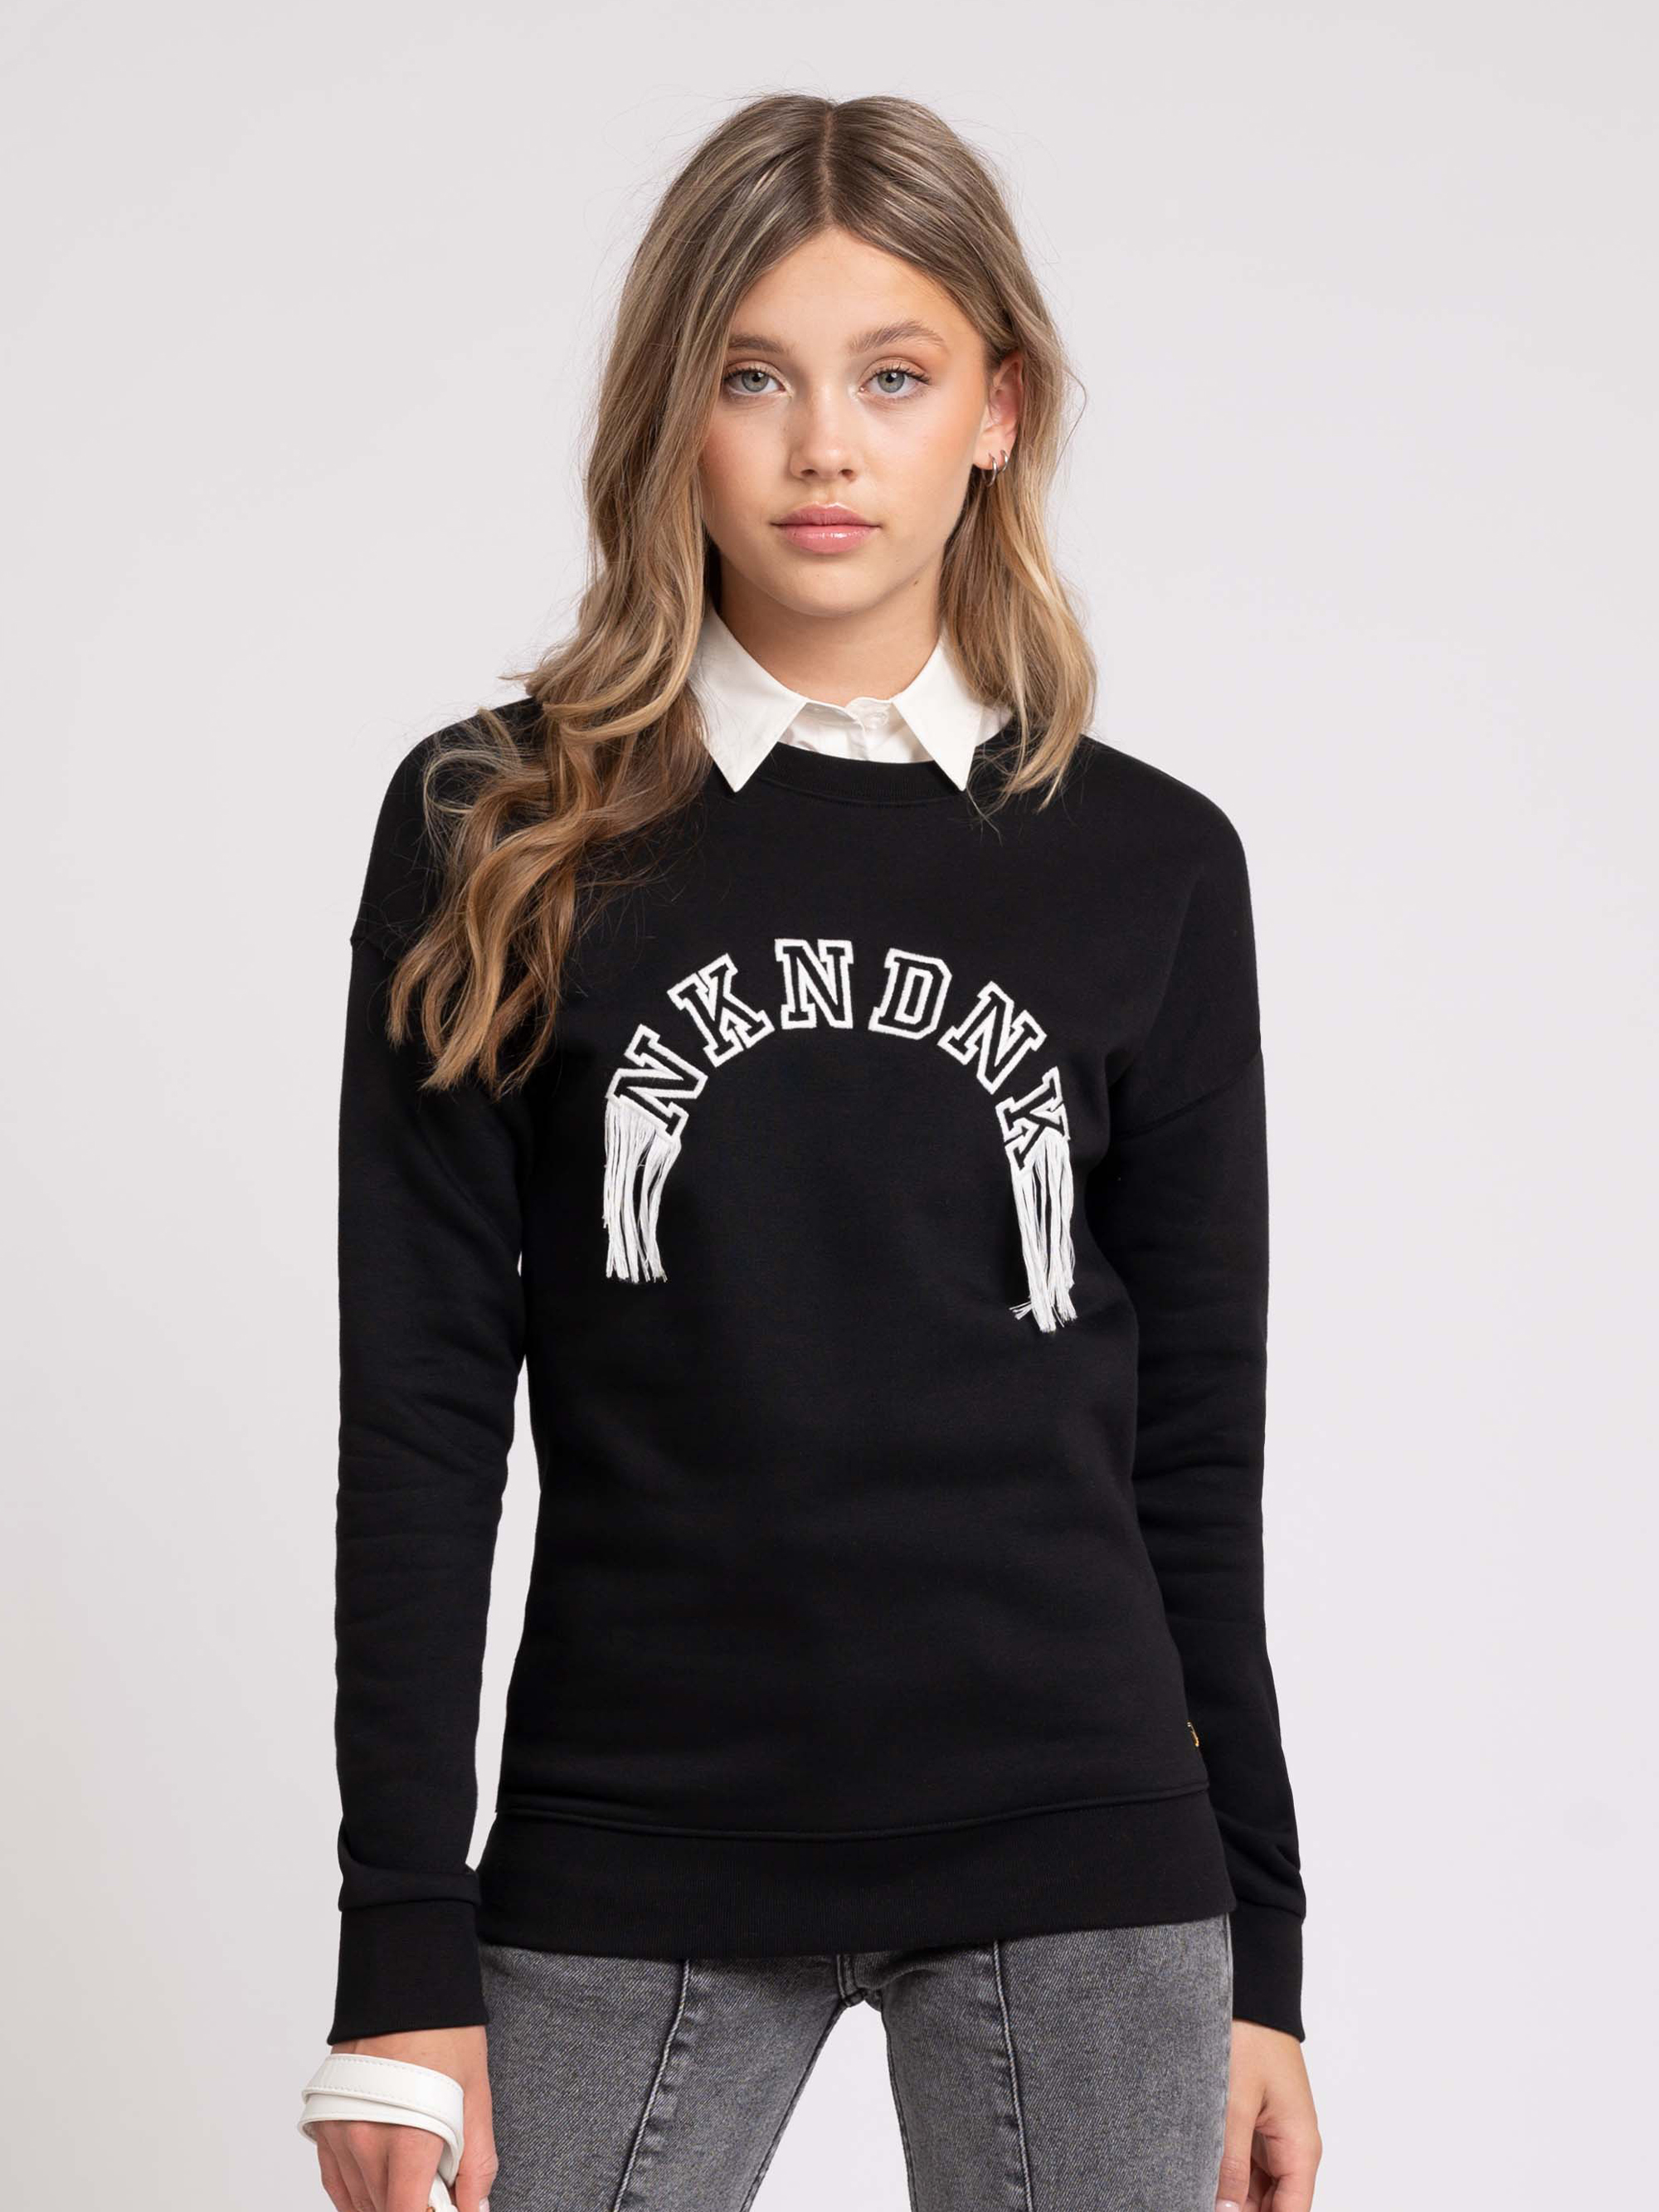 Sweater with round logo 